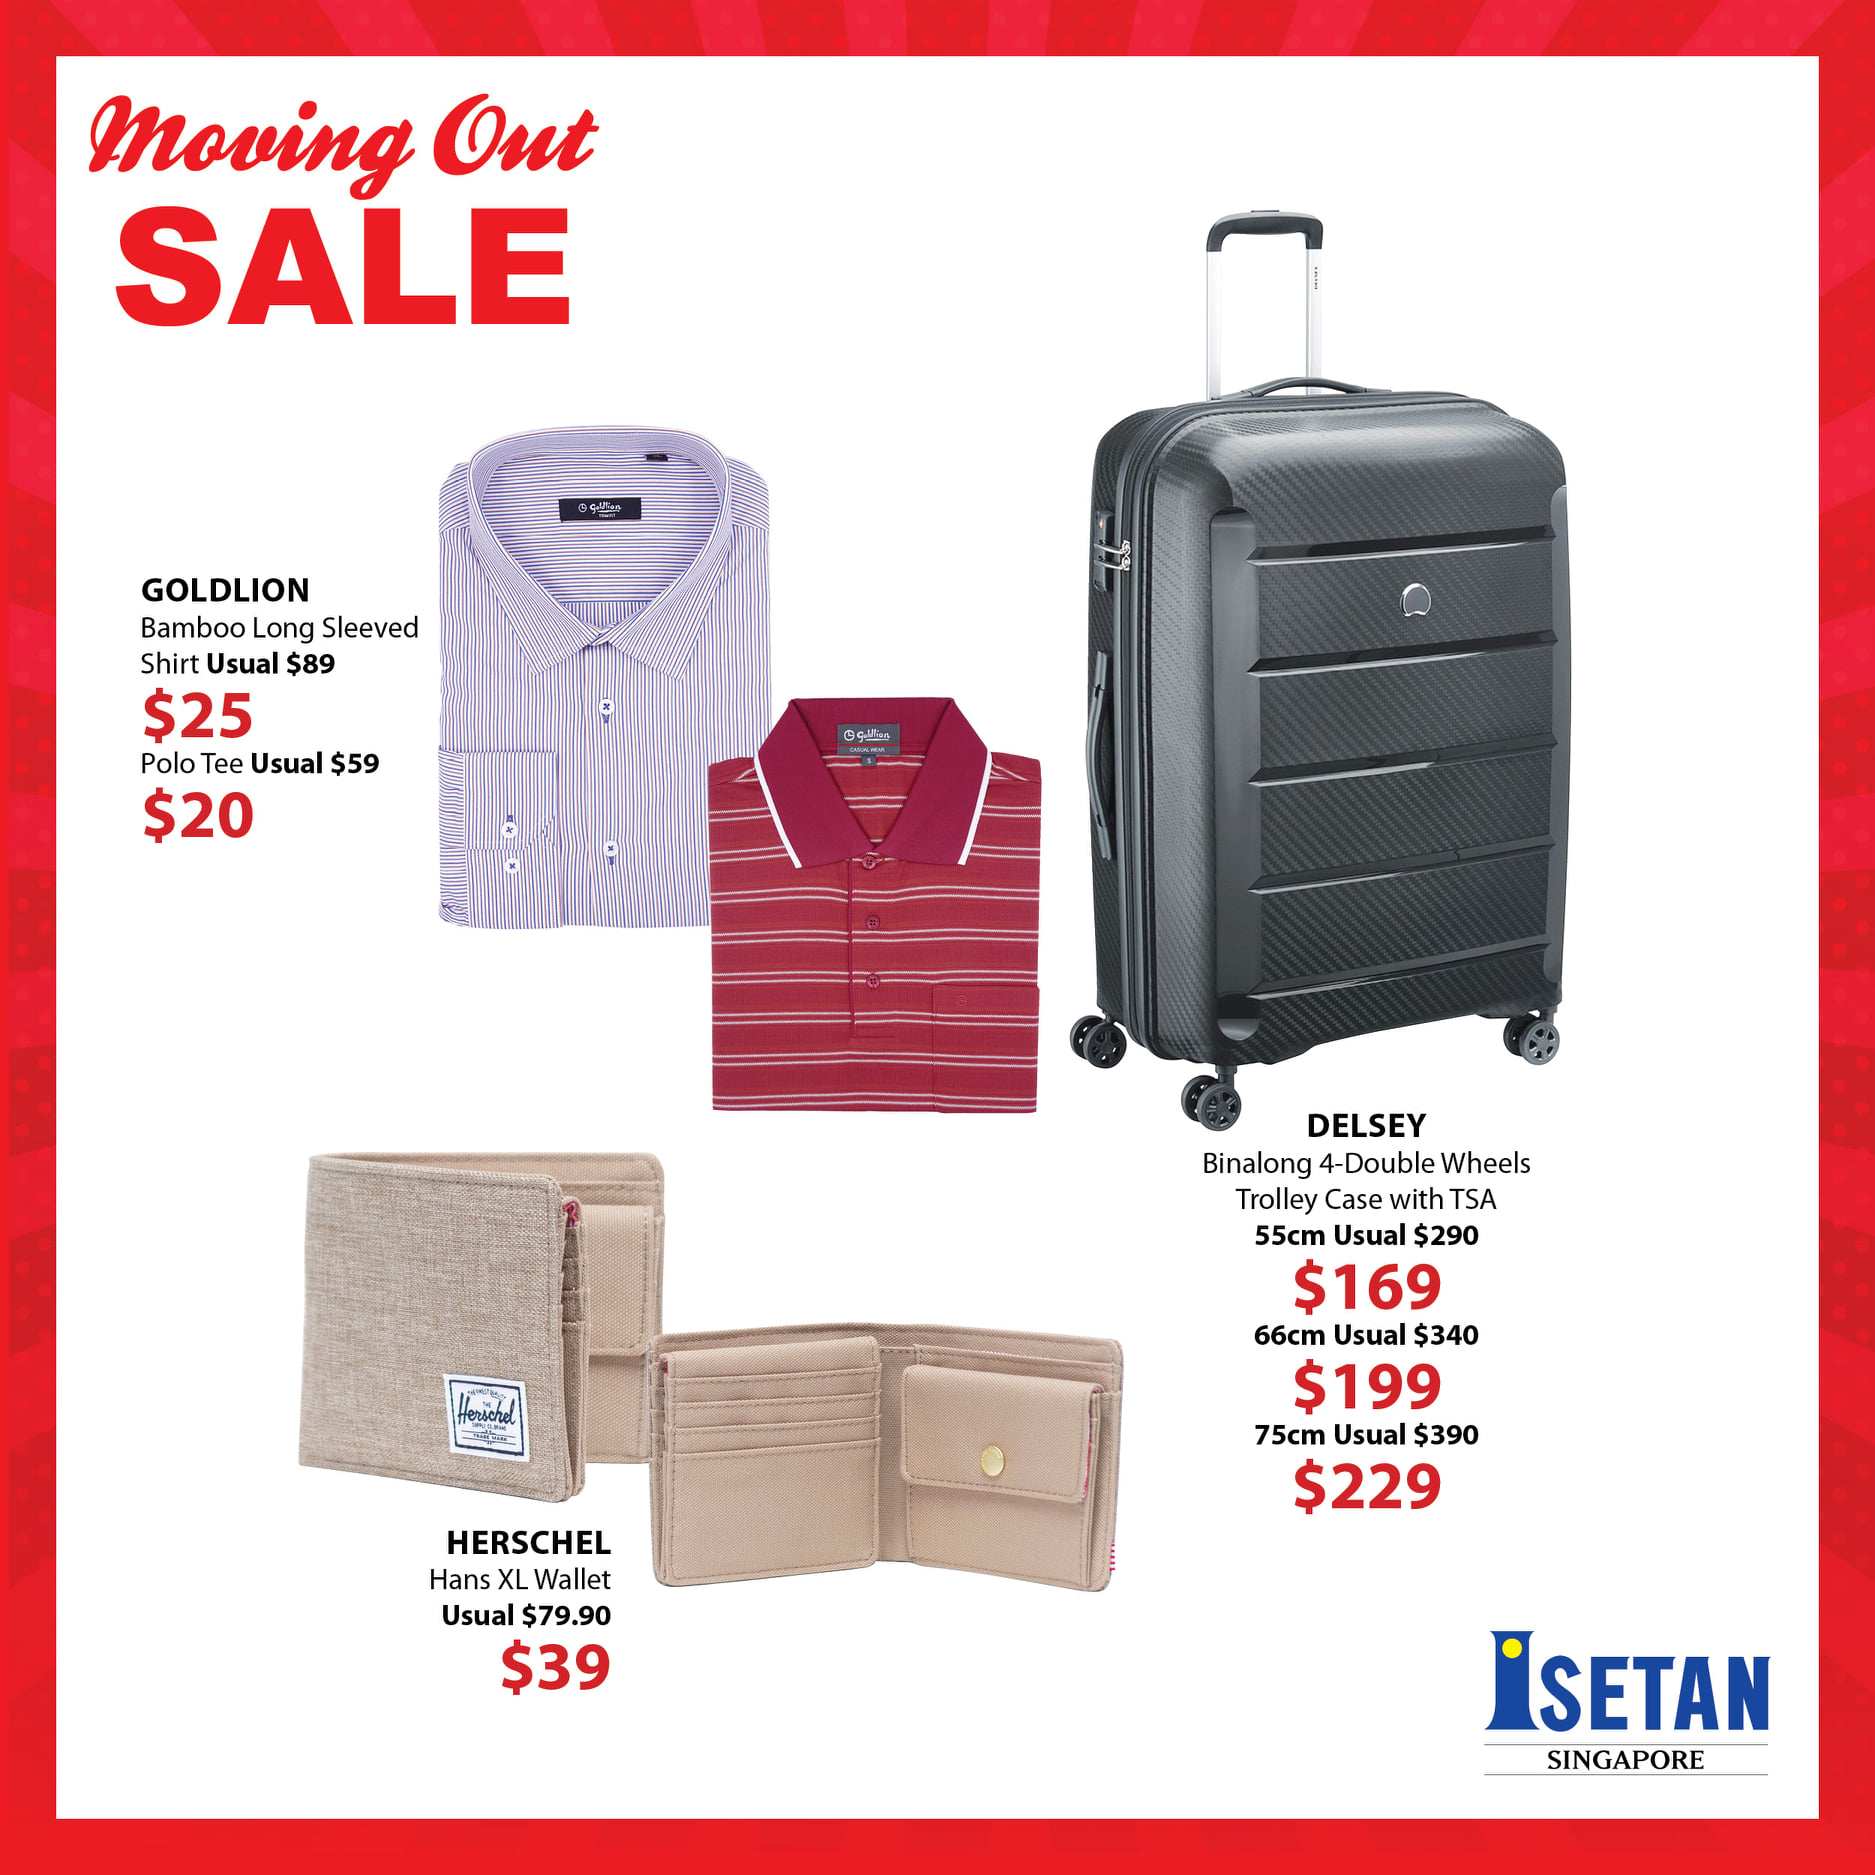 Isetan Westgate closing down sale up to 80% off till Jan. 26, 2020 - Mothership.SG - News from ...